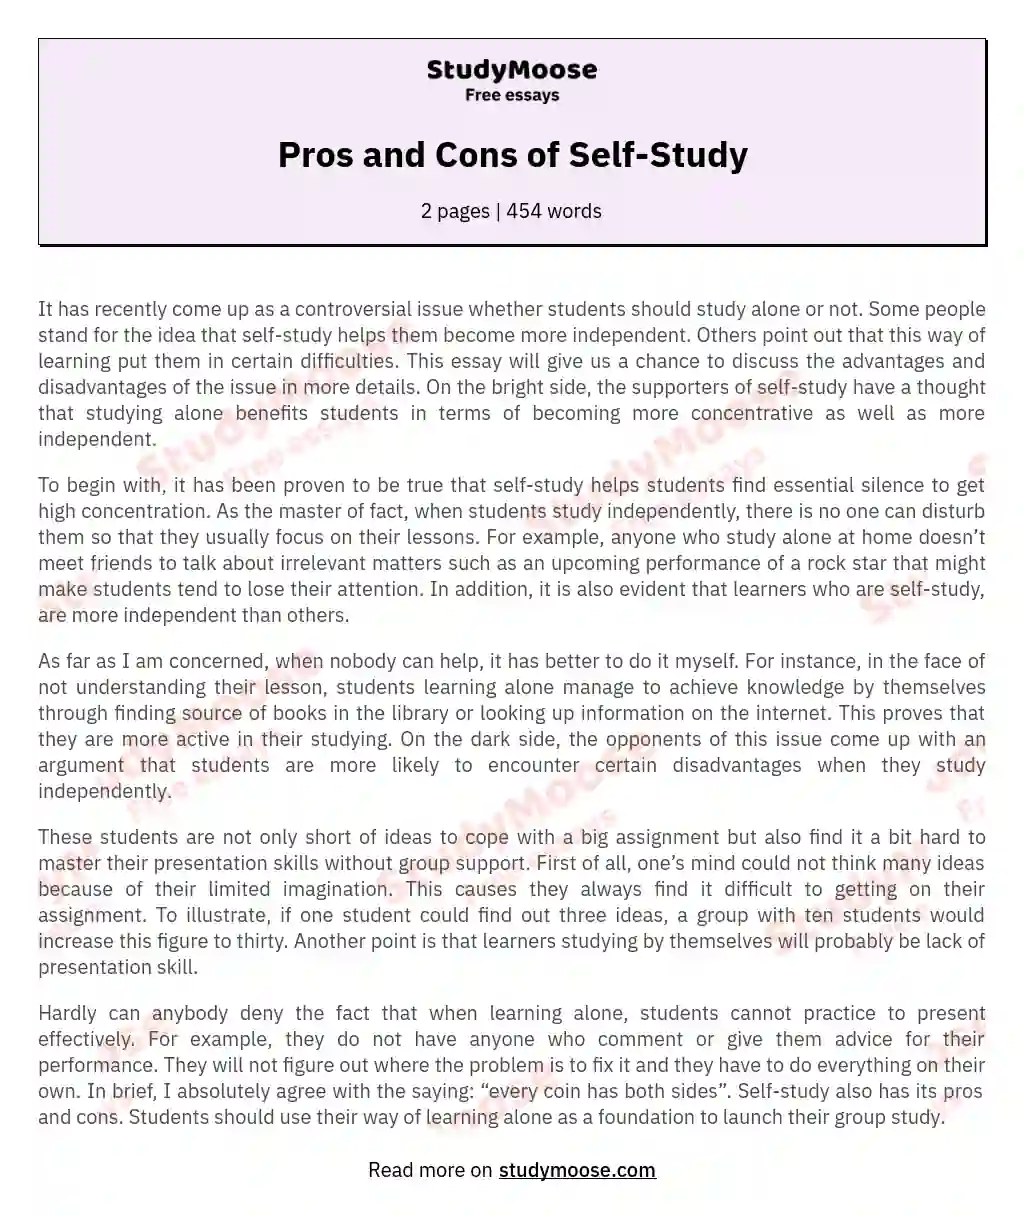 Pros and Cons of Self-Study essay